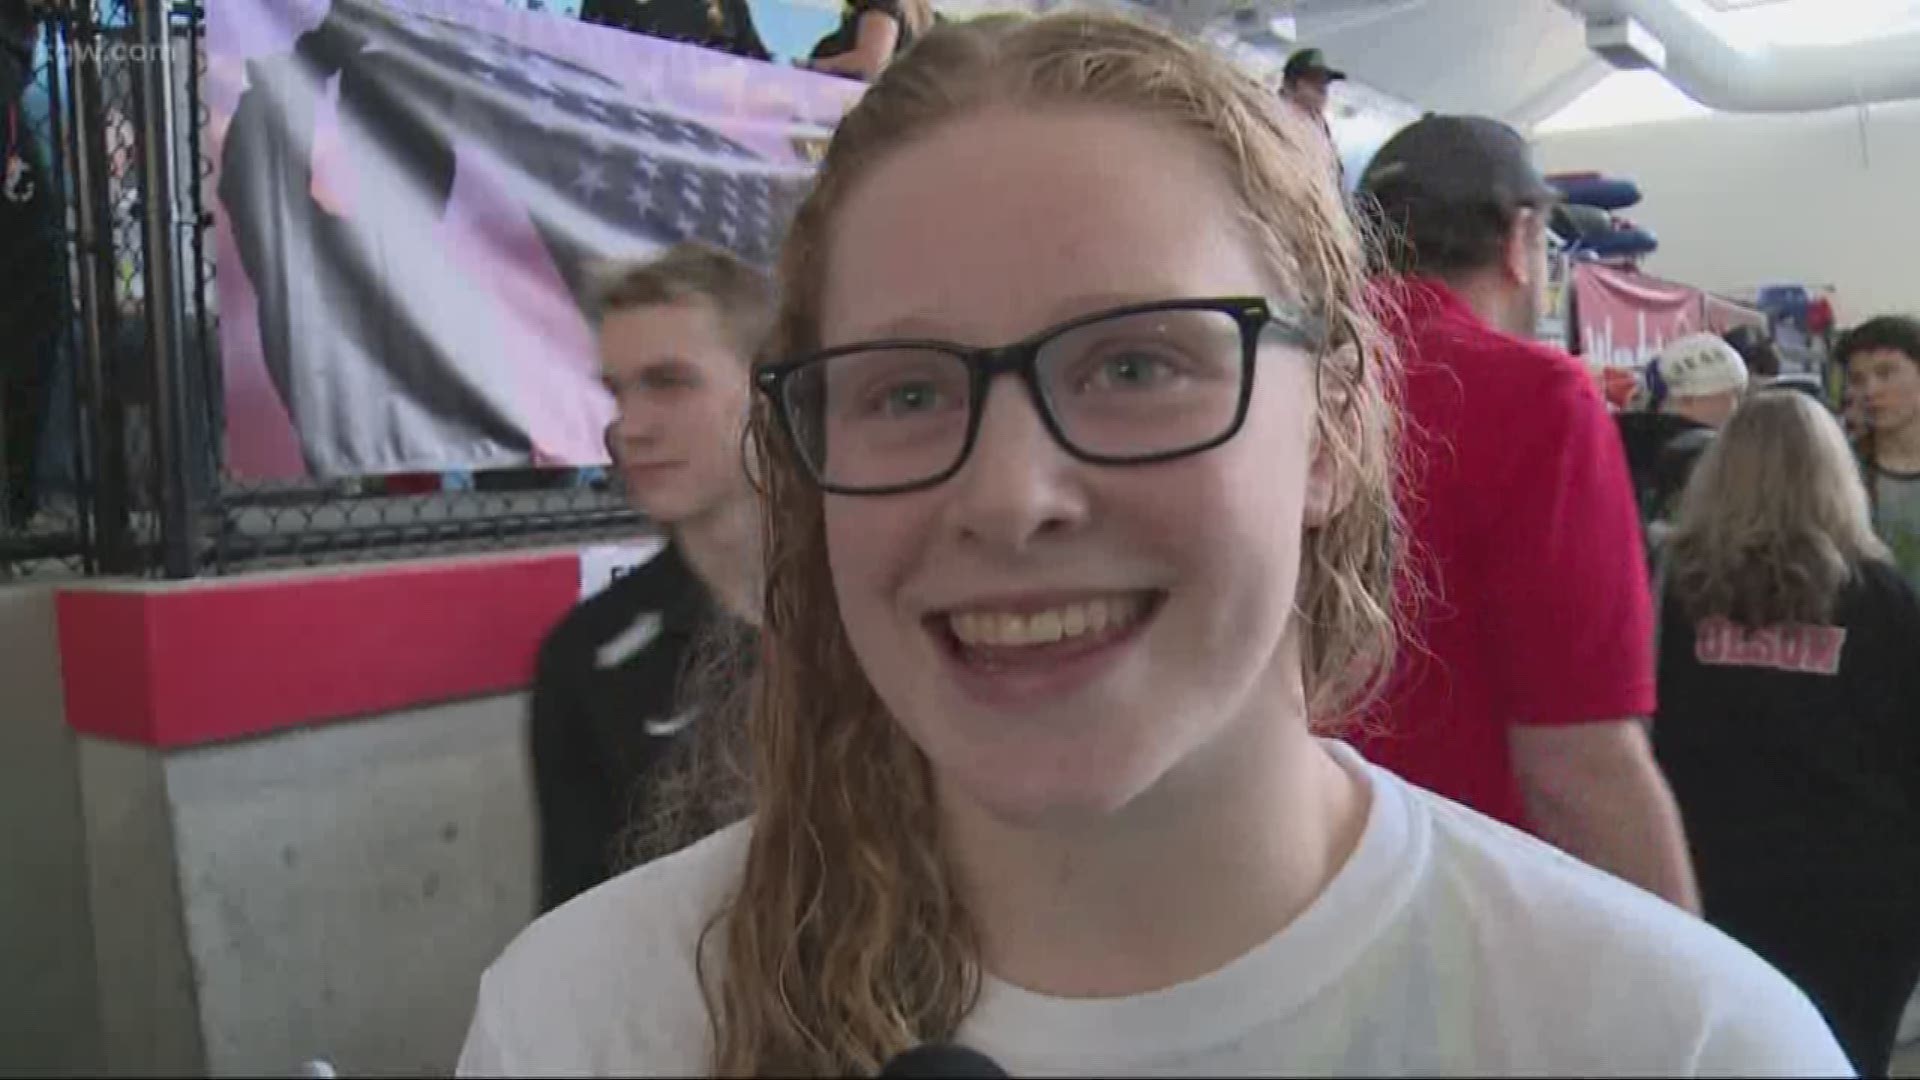 Aloha High School swimmer Kaitlyan Dobler set a national record in the 100-yard breaststroke at the Oregon high school state swim championships.